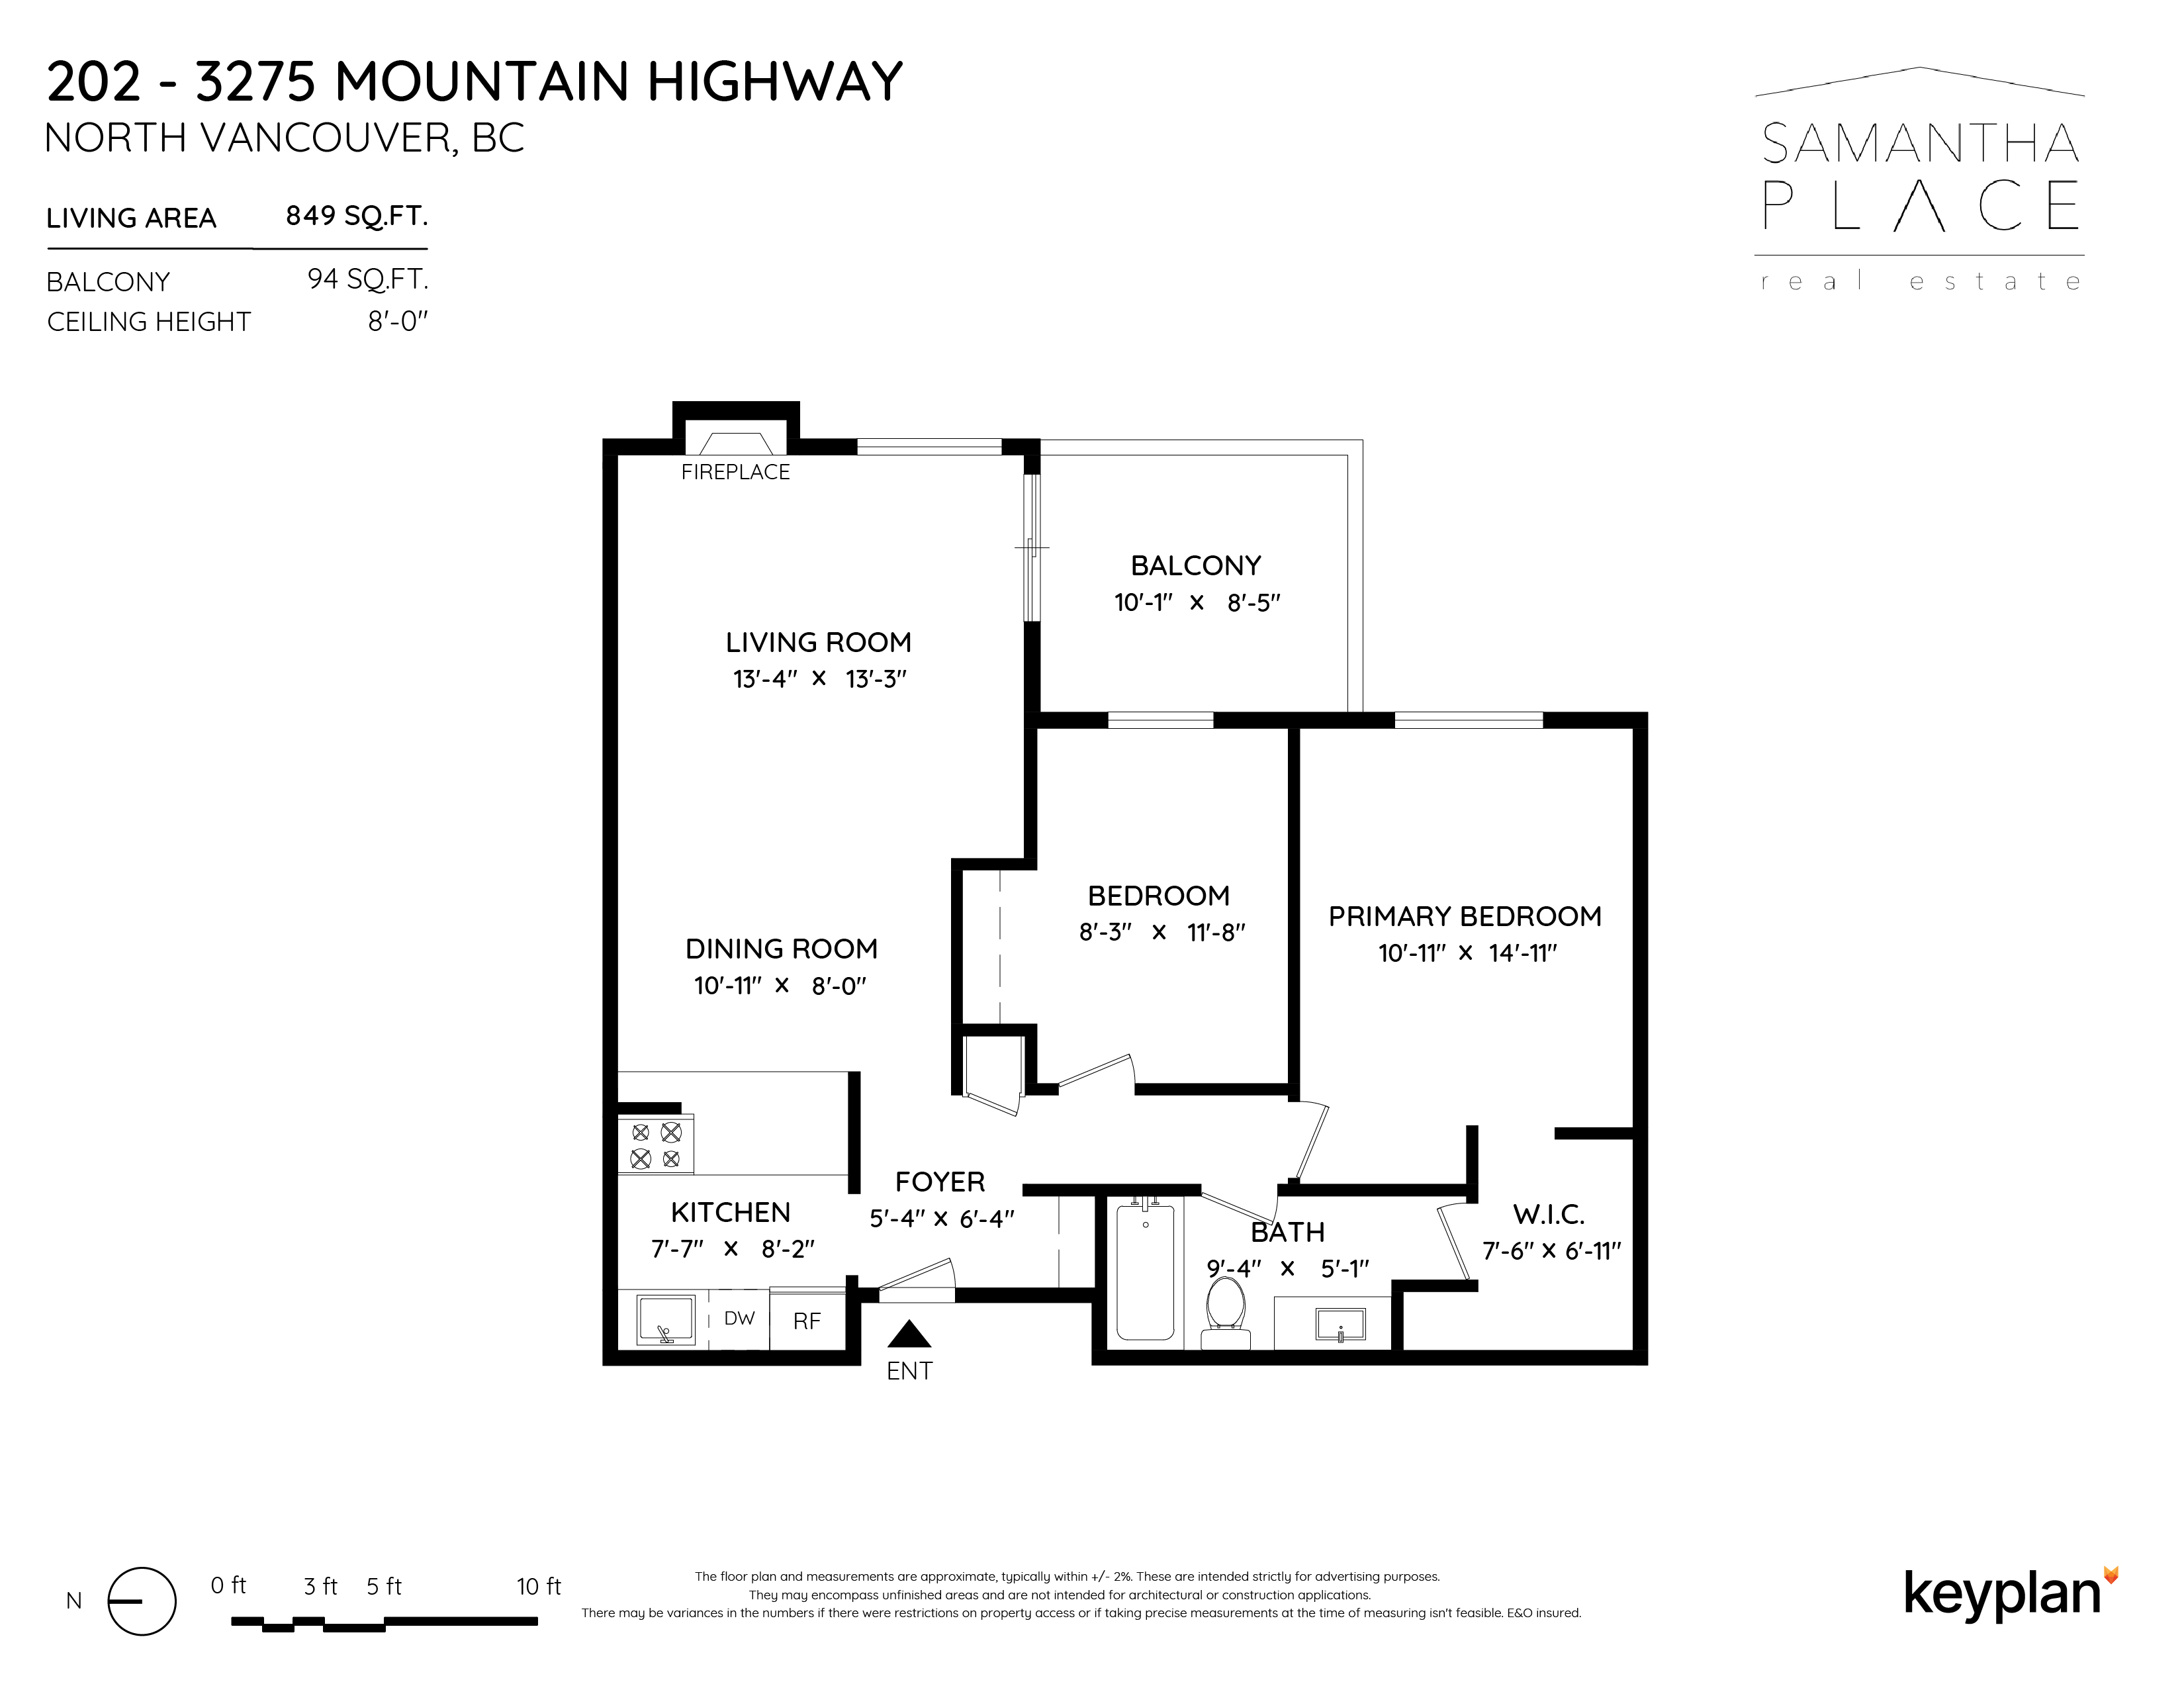 Samantha Place - Unit 202 - 3275 Mountain Hwy, North Vancouver, BC, Canada | Floor Plan 1